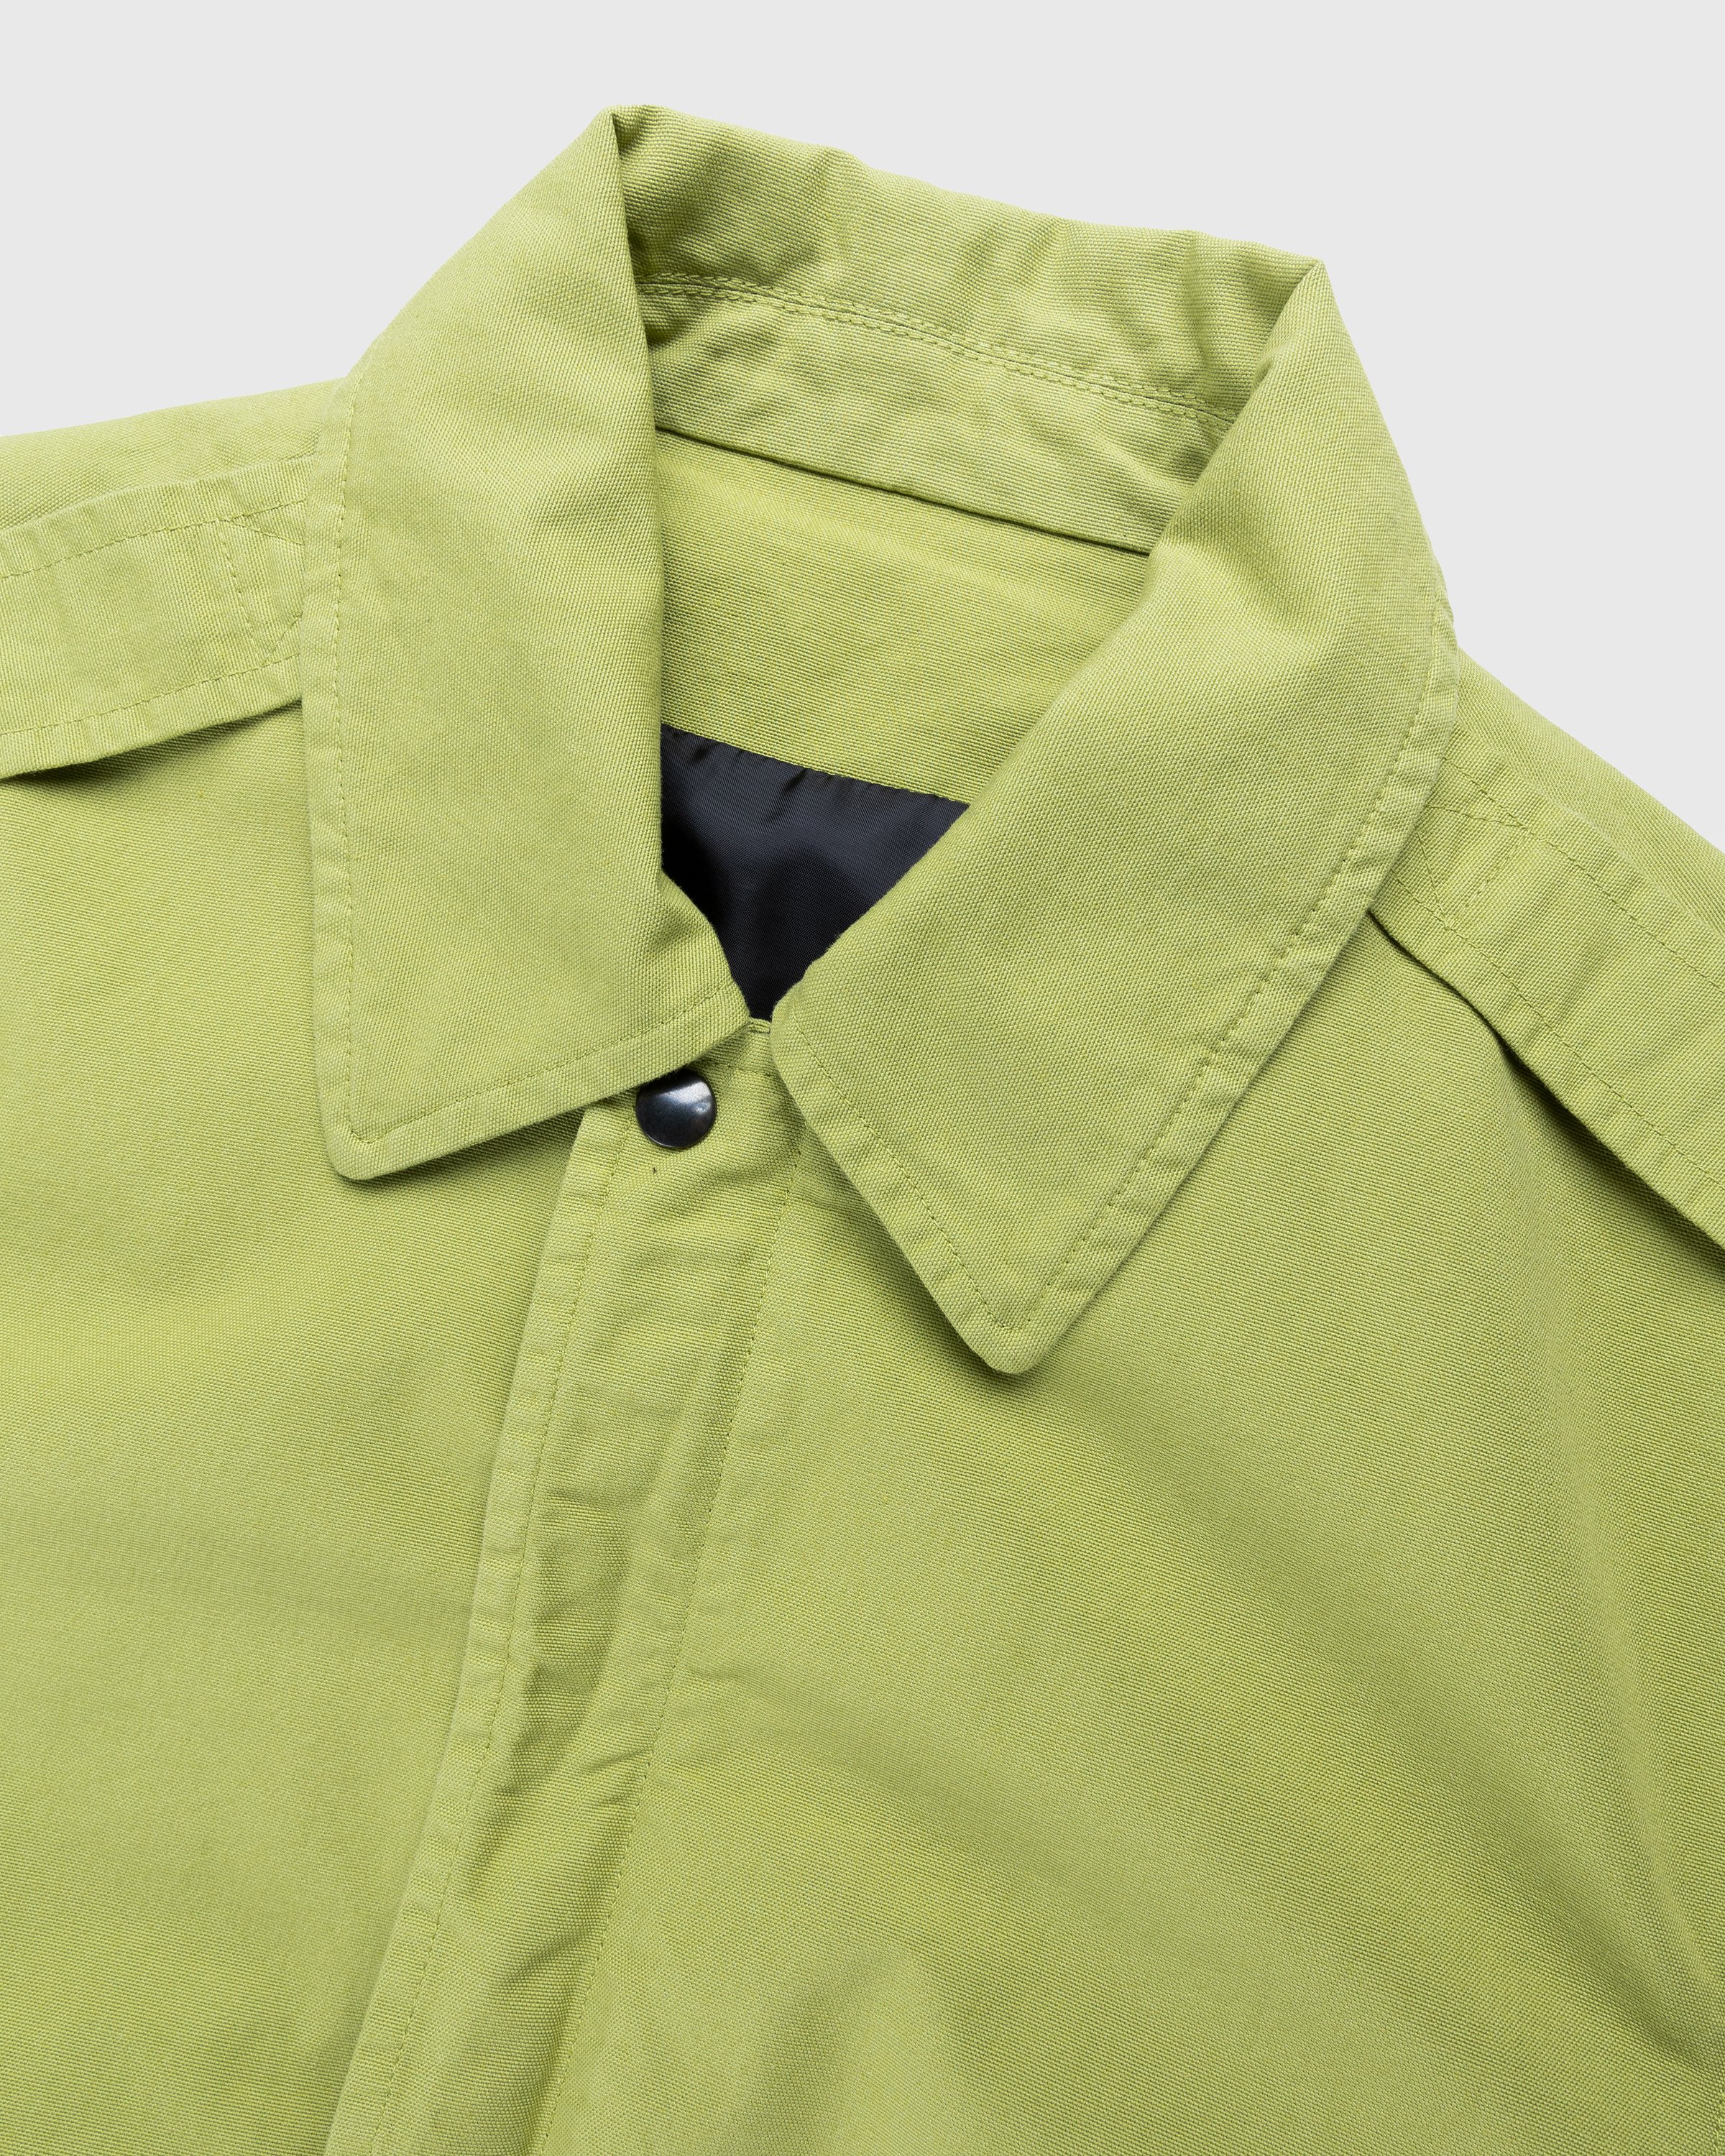 Winnie New York - Double Pocket Cotton Jacket Green - Clothing - Green - Image 5